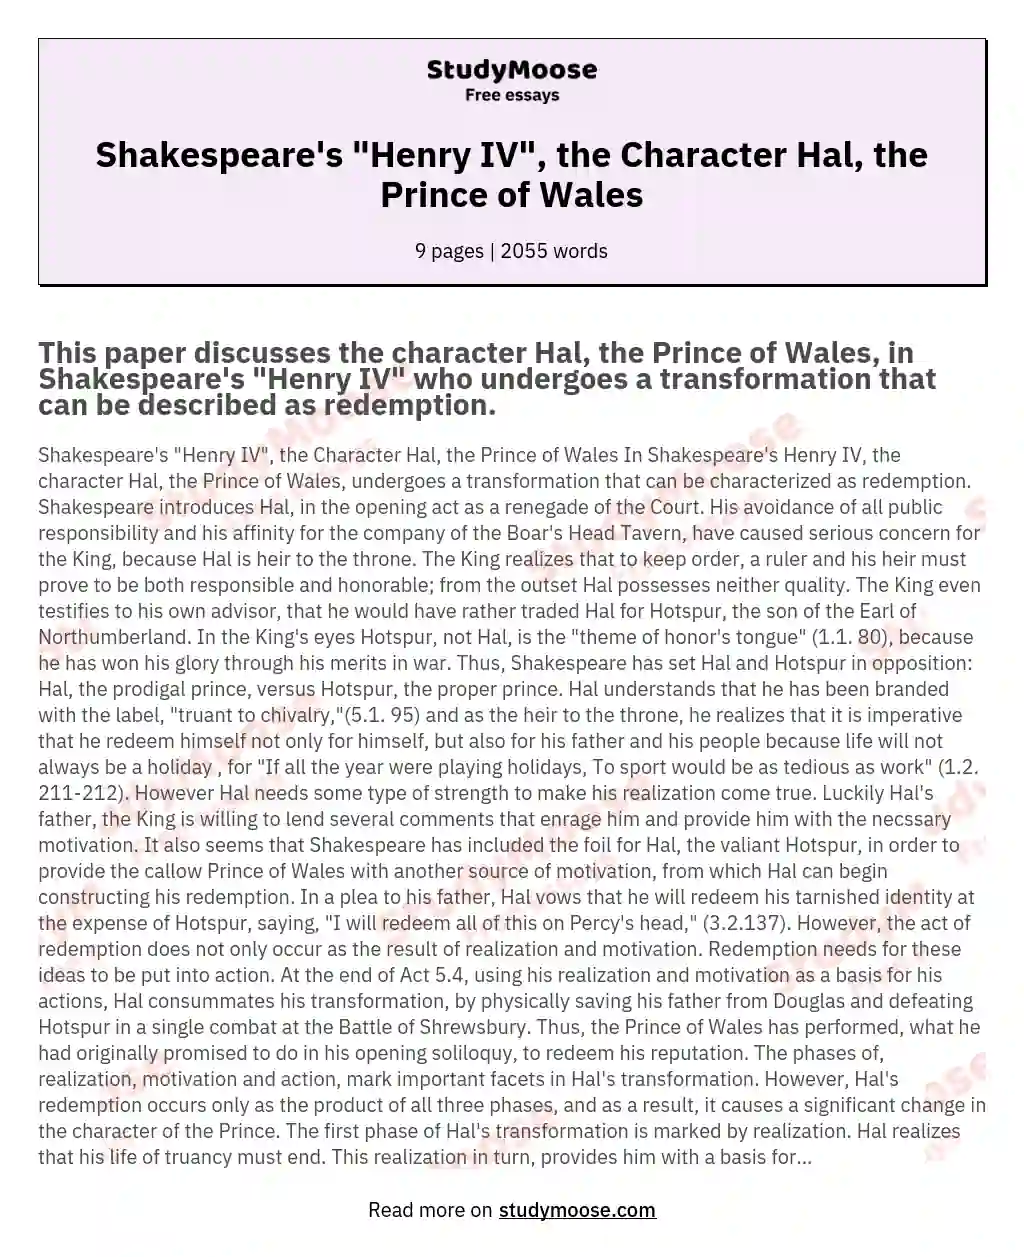 Shakespeare's "Henry IV", the Character Hal, the Prince of Wales